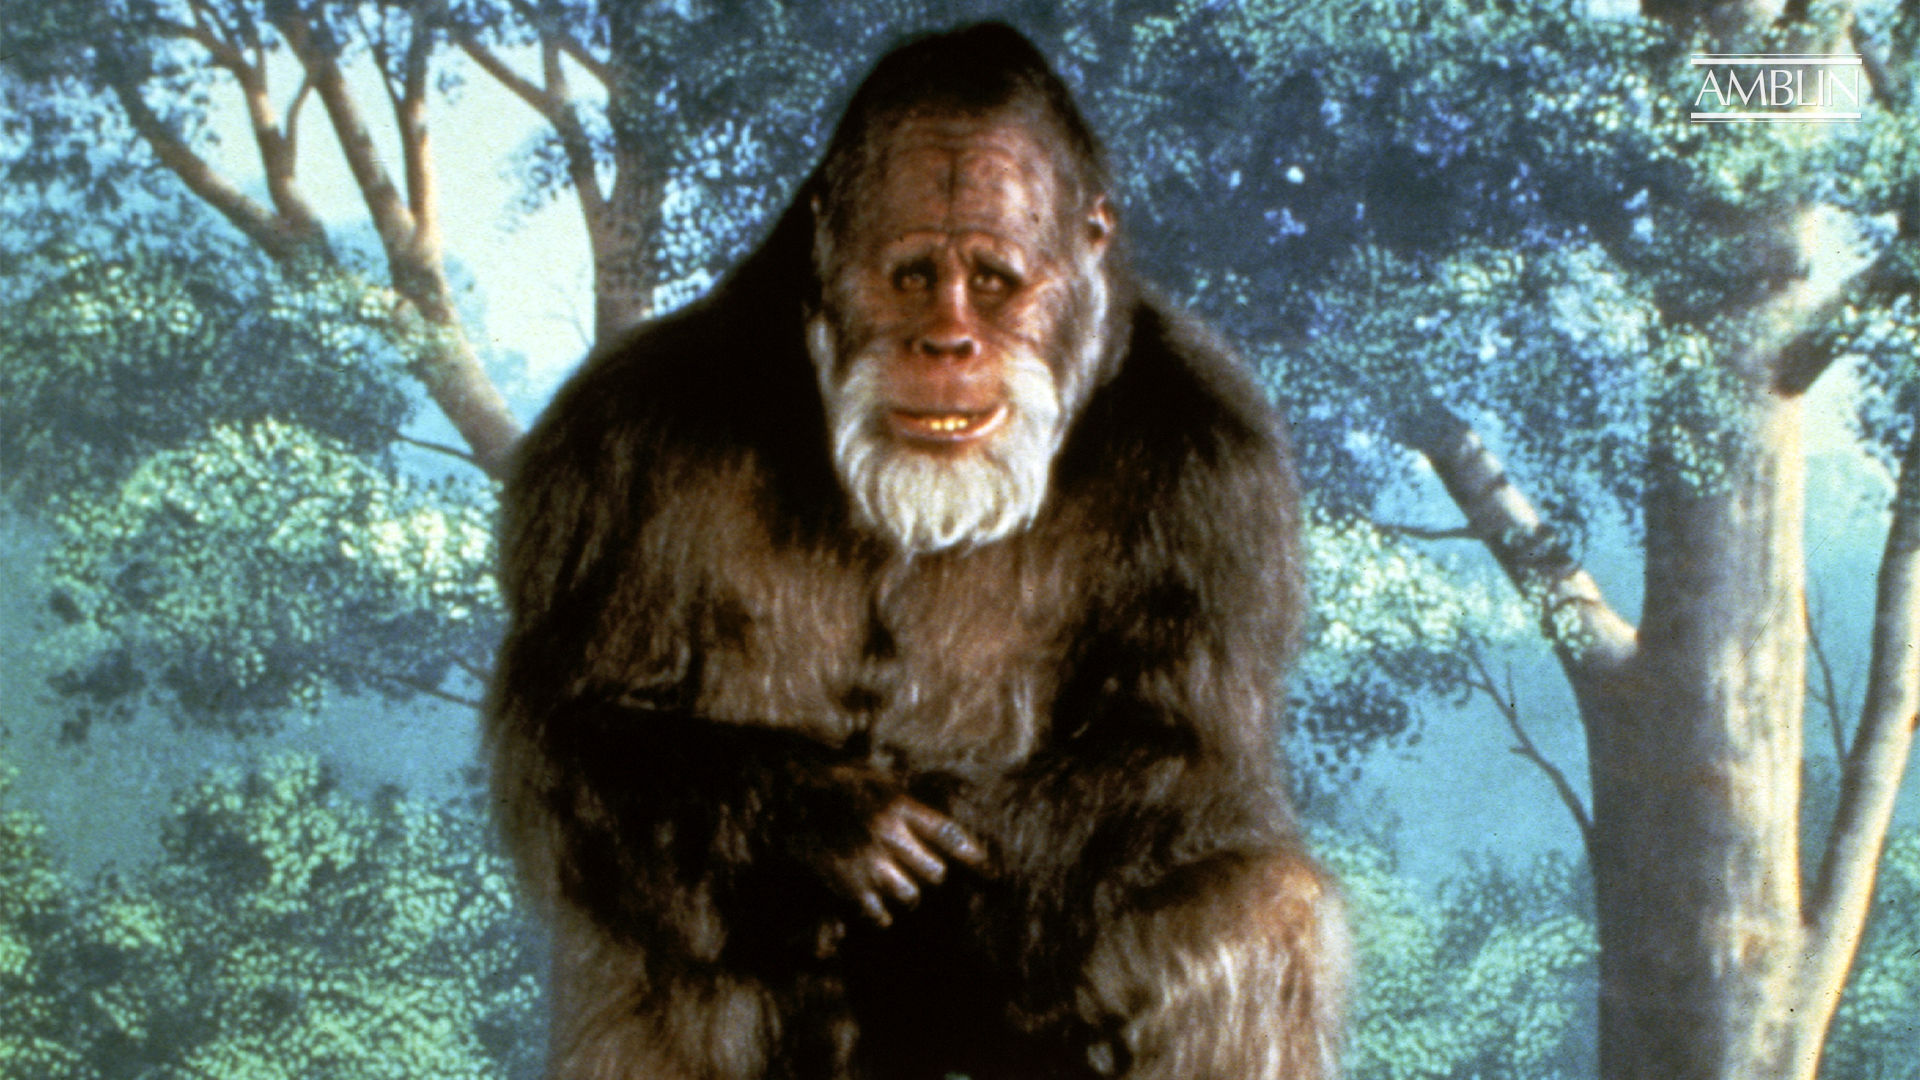 Harry and the Hendersons - About the Show | Amblin